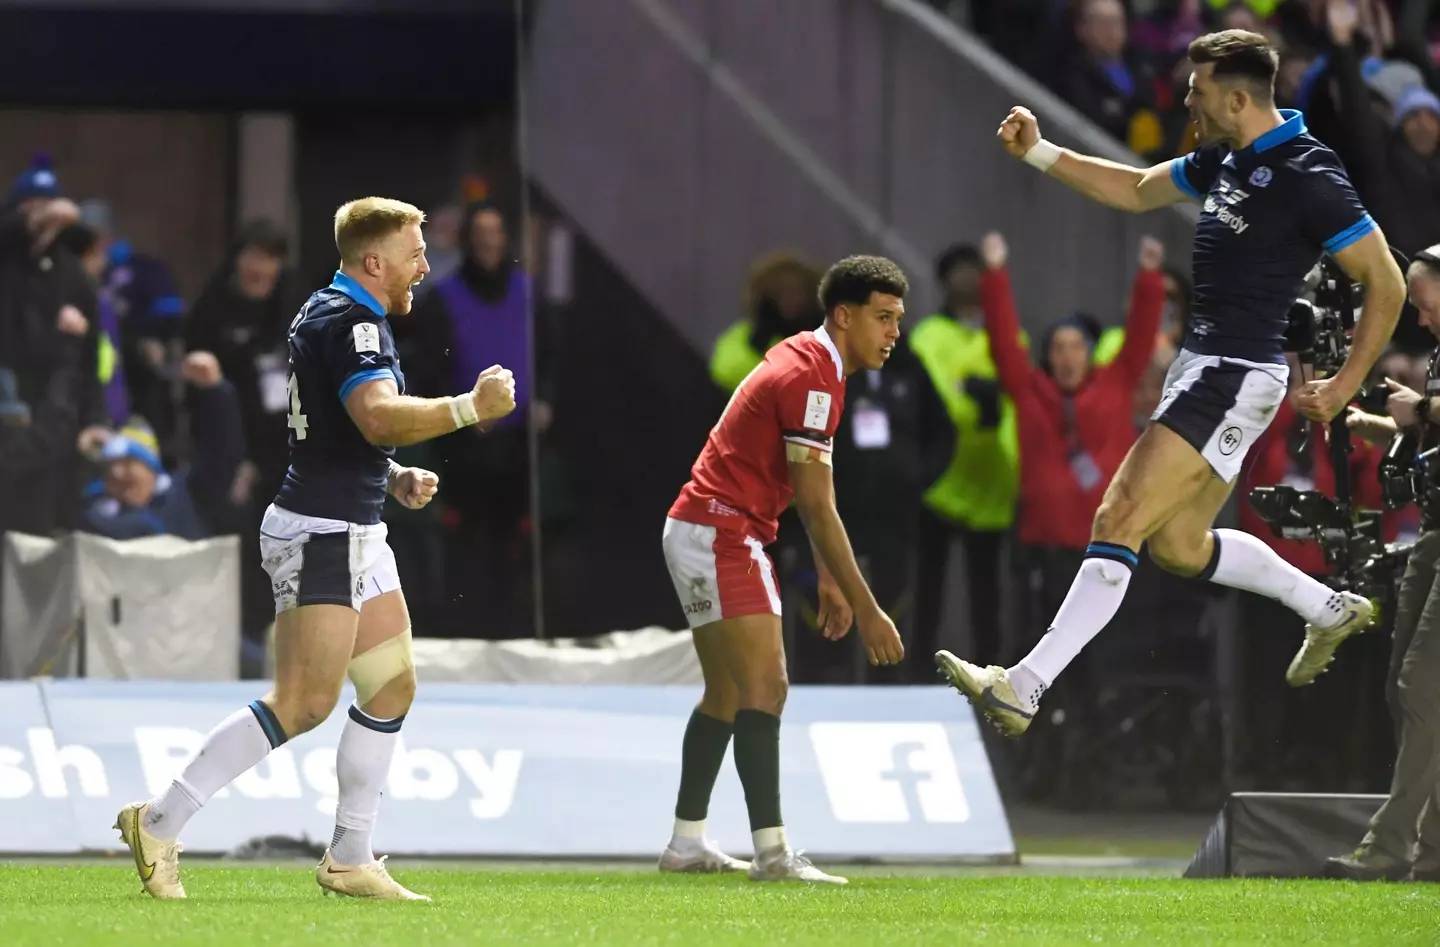 Wales have been battered by Scotland and Ireland in their opening two games of this year's Six Nations. Image: Alamy